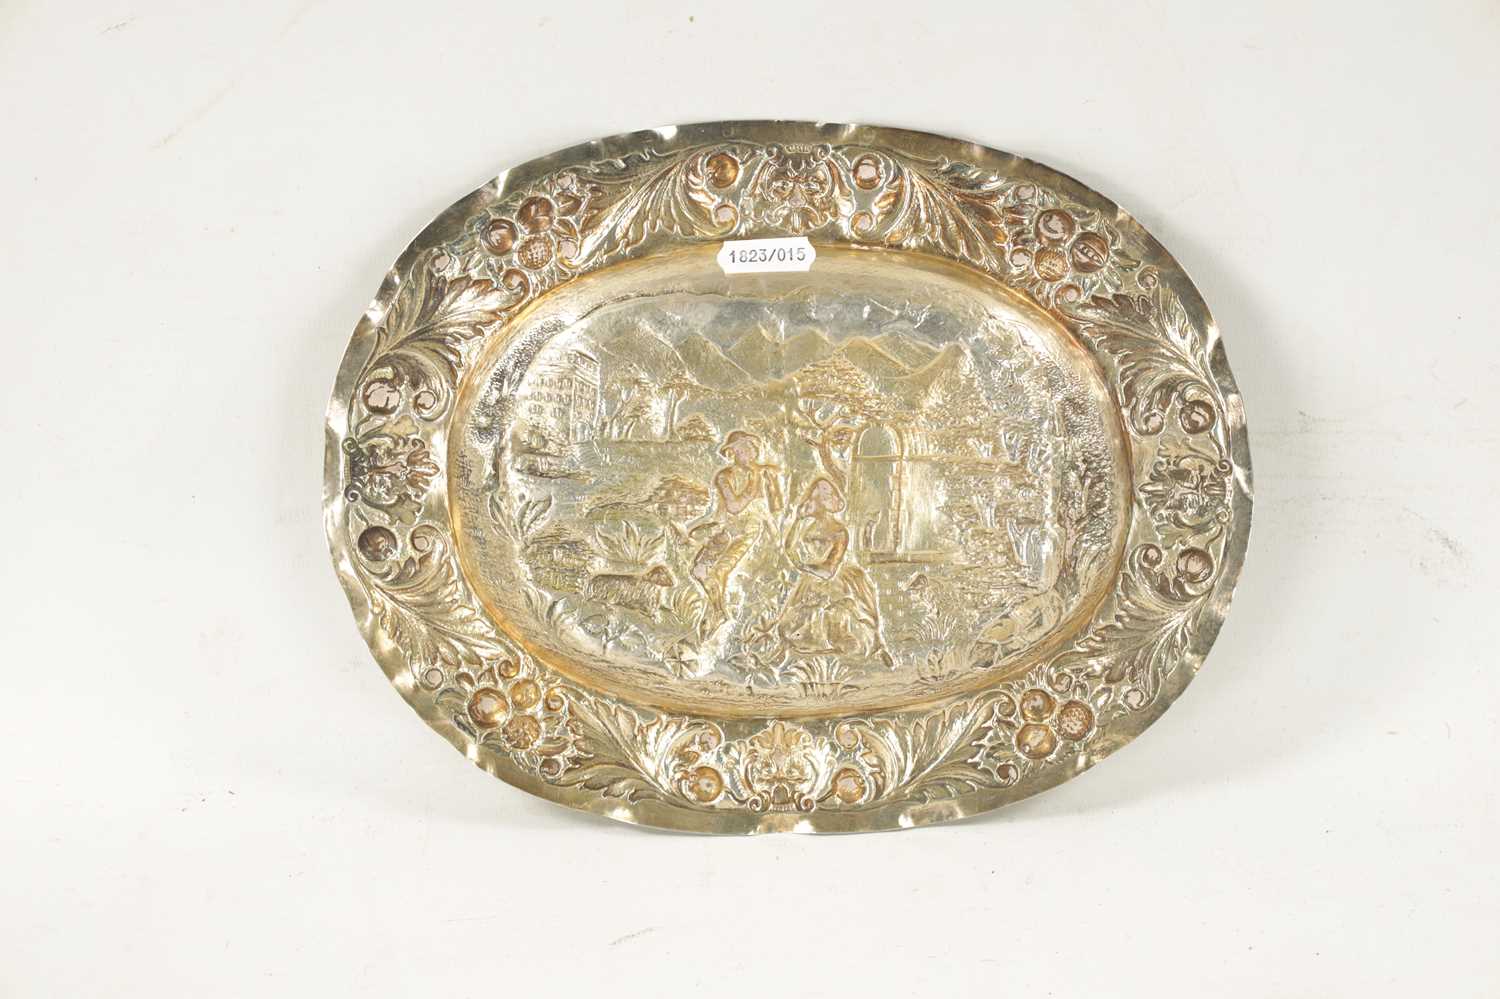 AN 18TH CENTURY GERMAN REPOUSSE SILVER AND SILVER GILT OVAL CHARGER - Image 5 of 10